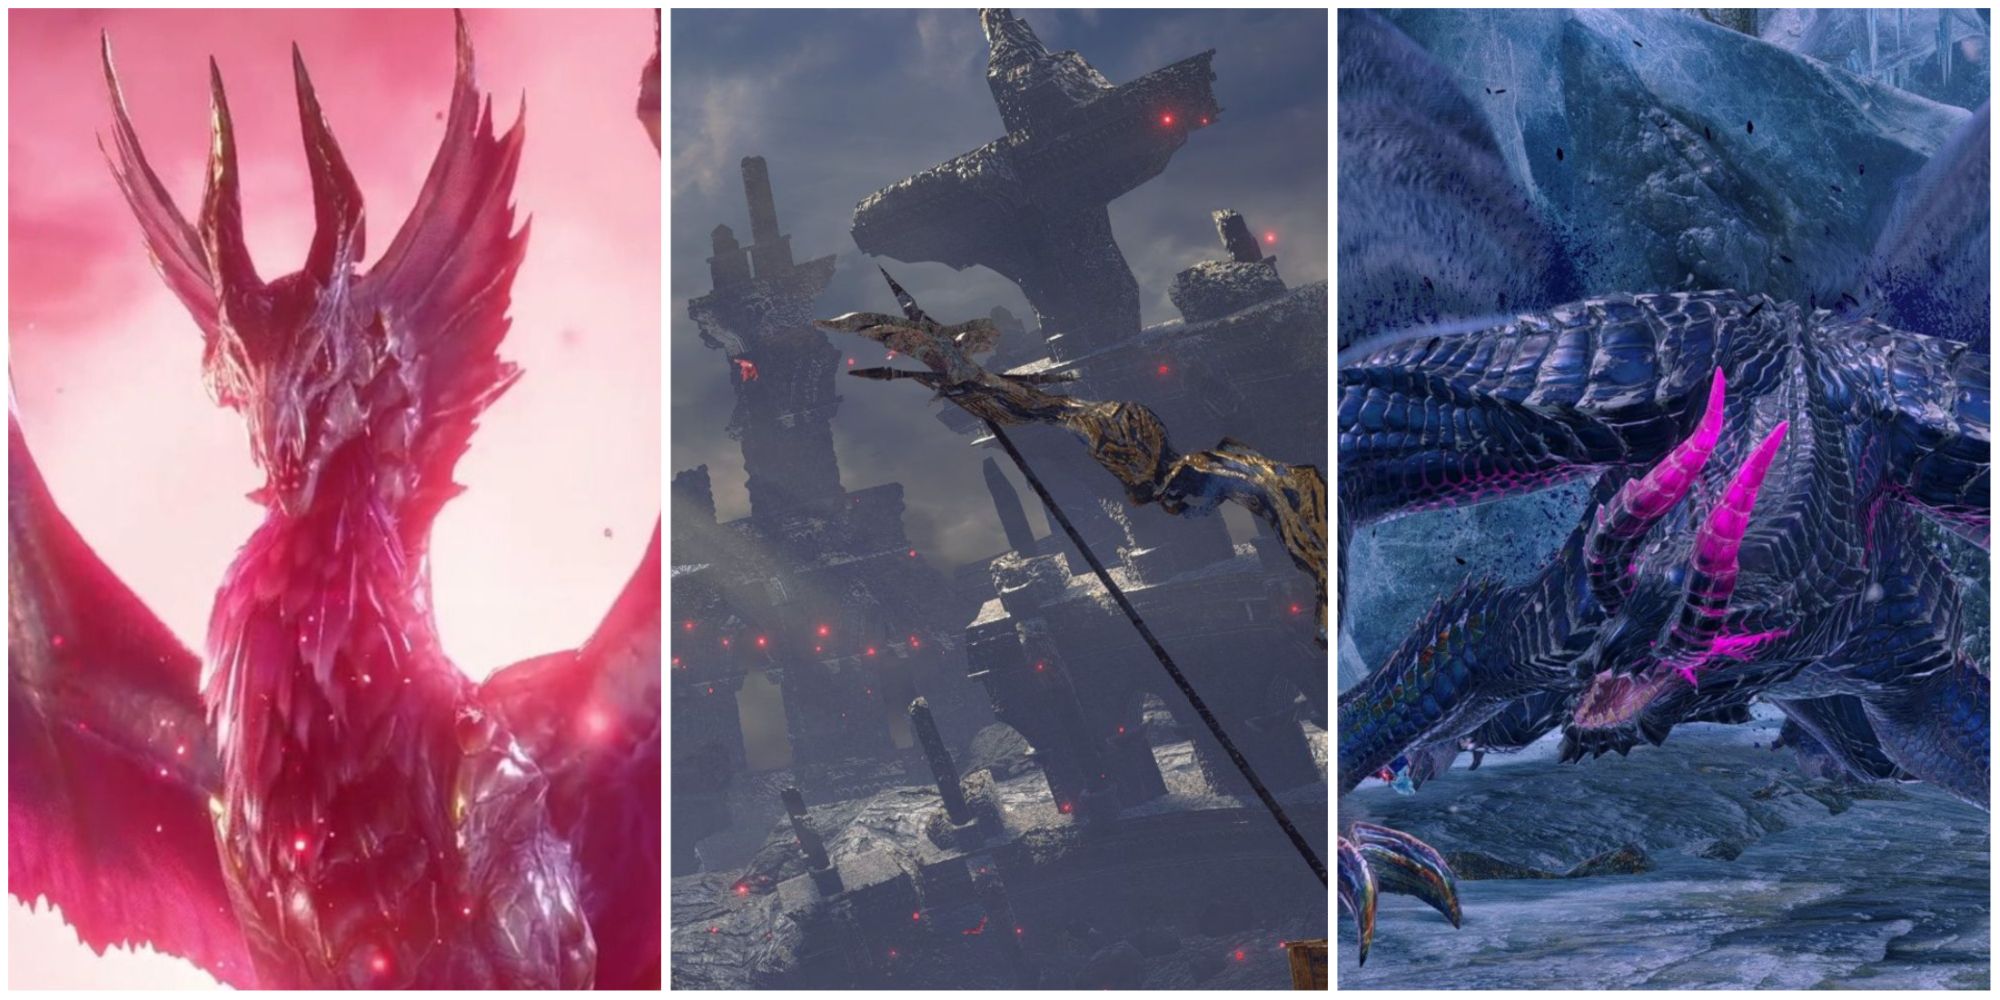 Malzeno covered in Qurio, a banner dangling over Gasmagorm's arena, Gore Magala with their purple horns showing, left to right